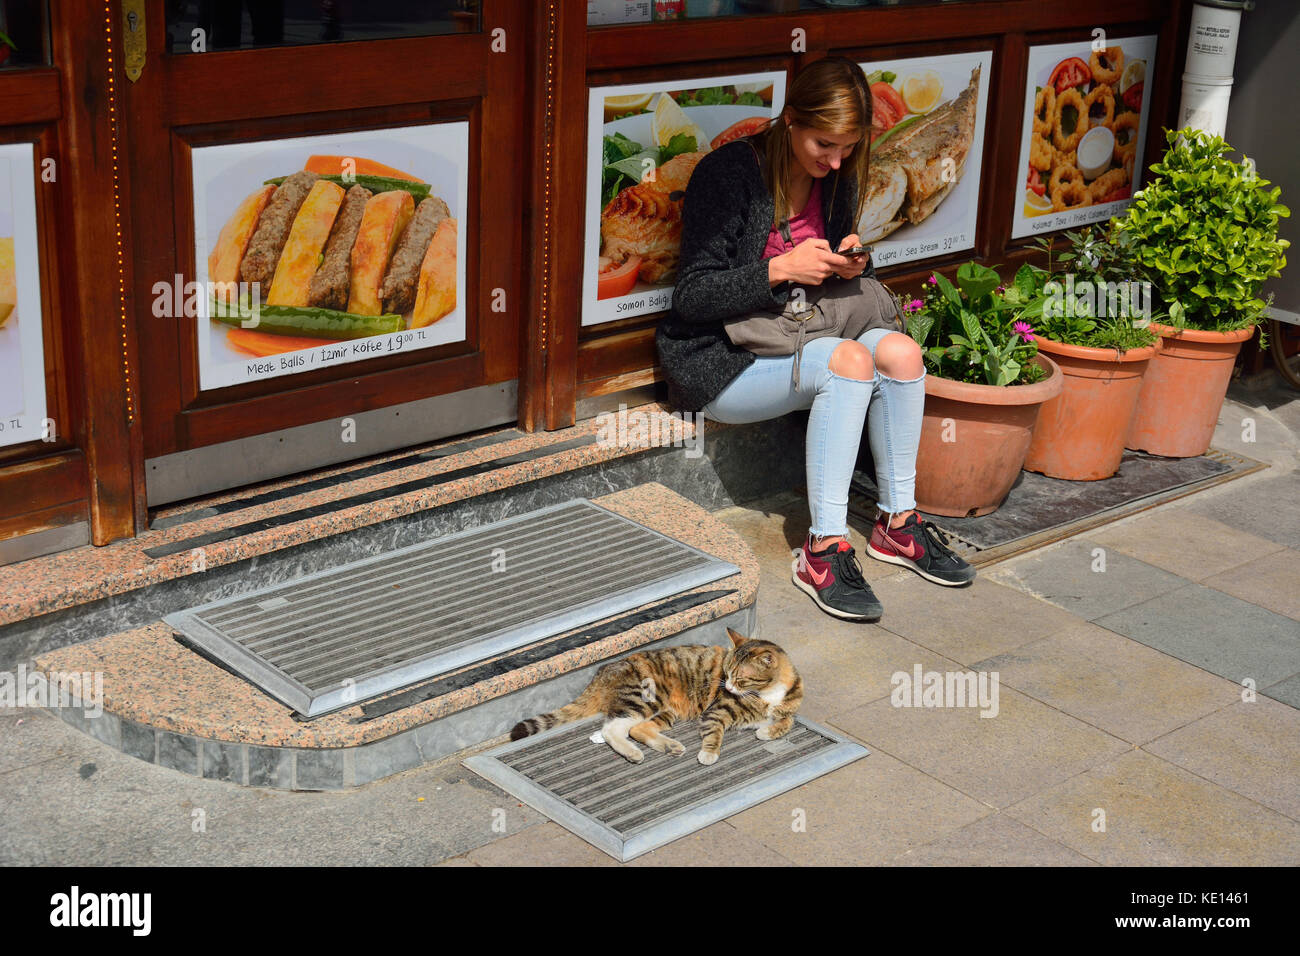 Istanbul, Turkey - April 22, 2017. Street scene in Istanbul, with girl sitting and holding a smartphone and cat lying in front of kebab shop in Istanb Stock Photo